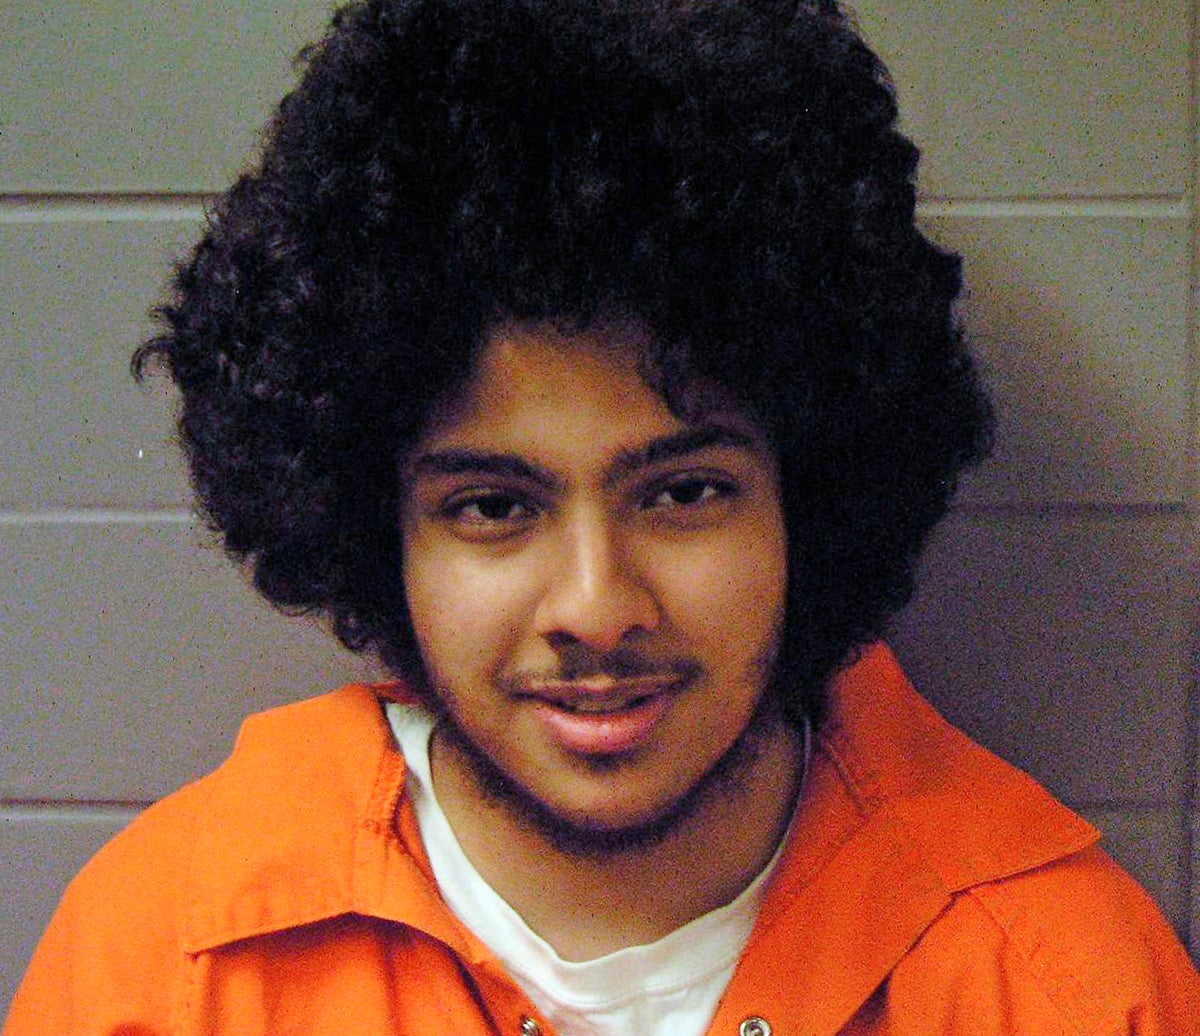 A judge adds 11 years to the sentence for a man in a Chicago bomb plot